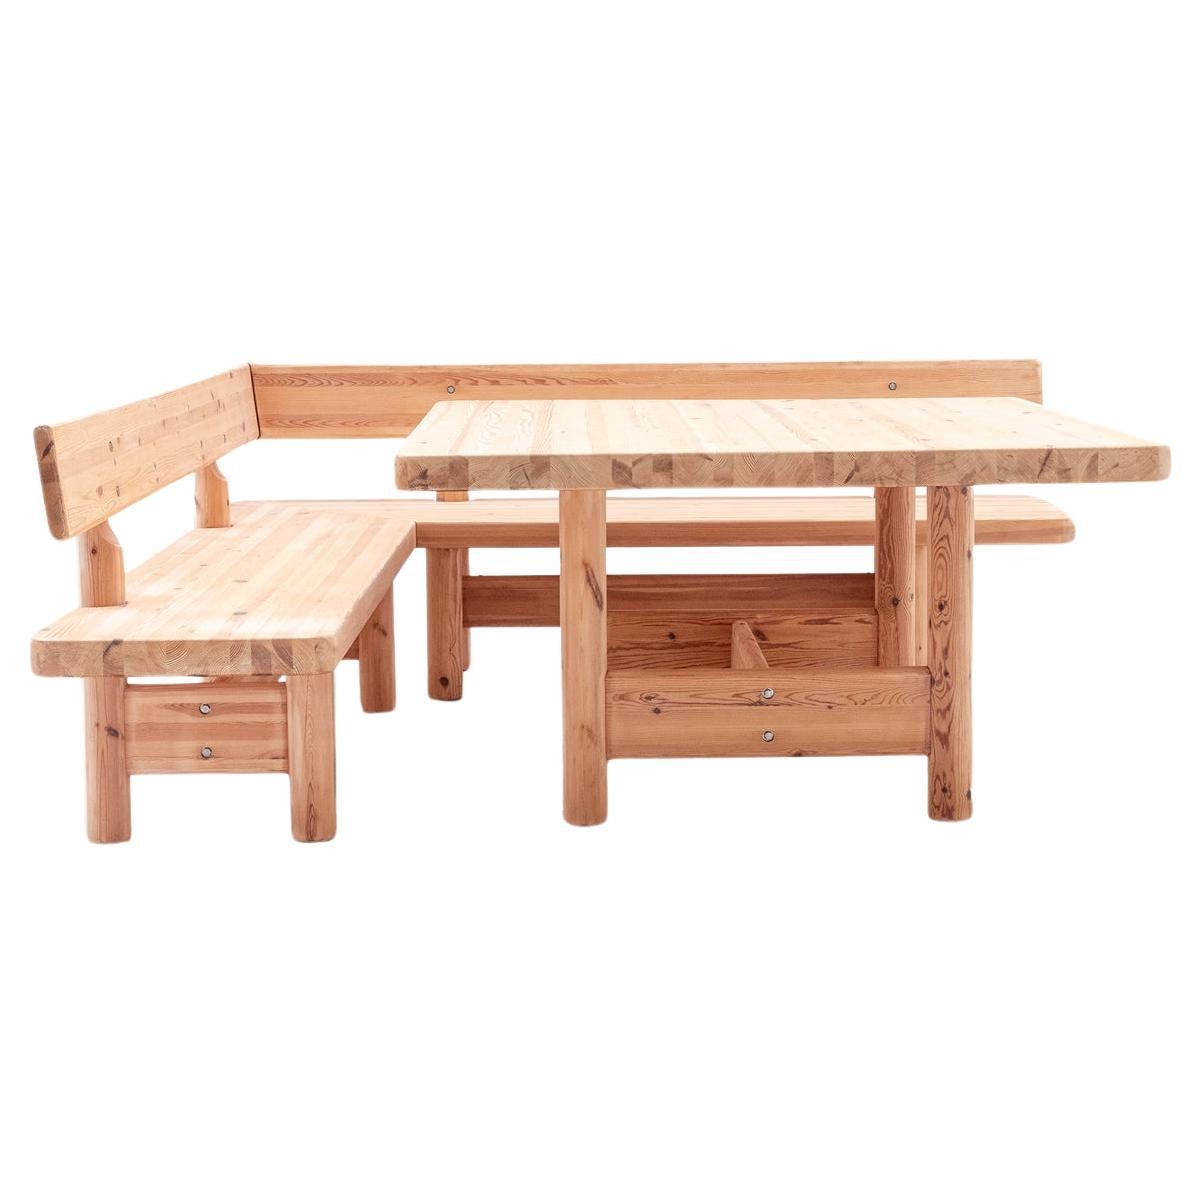 Rainer Daumiller. Set of a table and two benches in larch. 1980s. LS57051009B For Sale